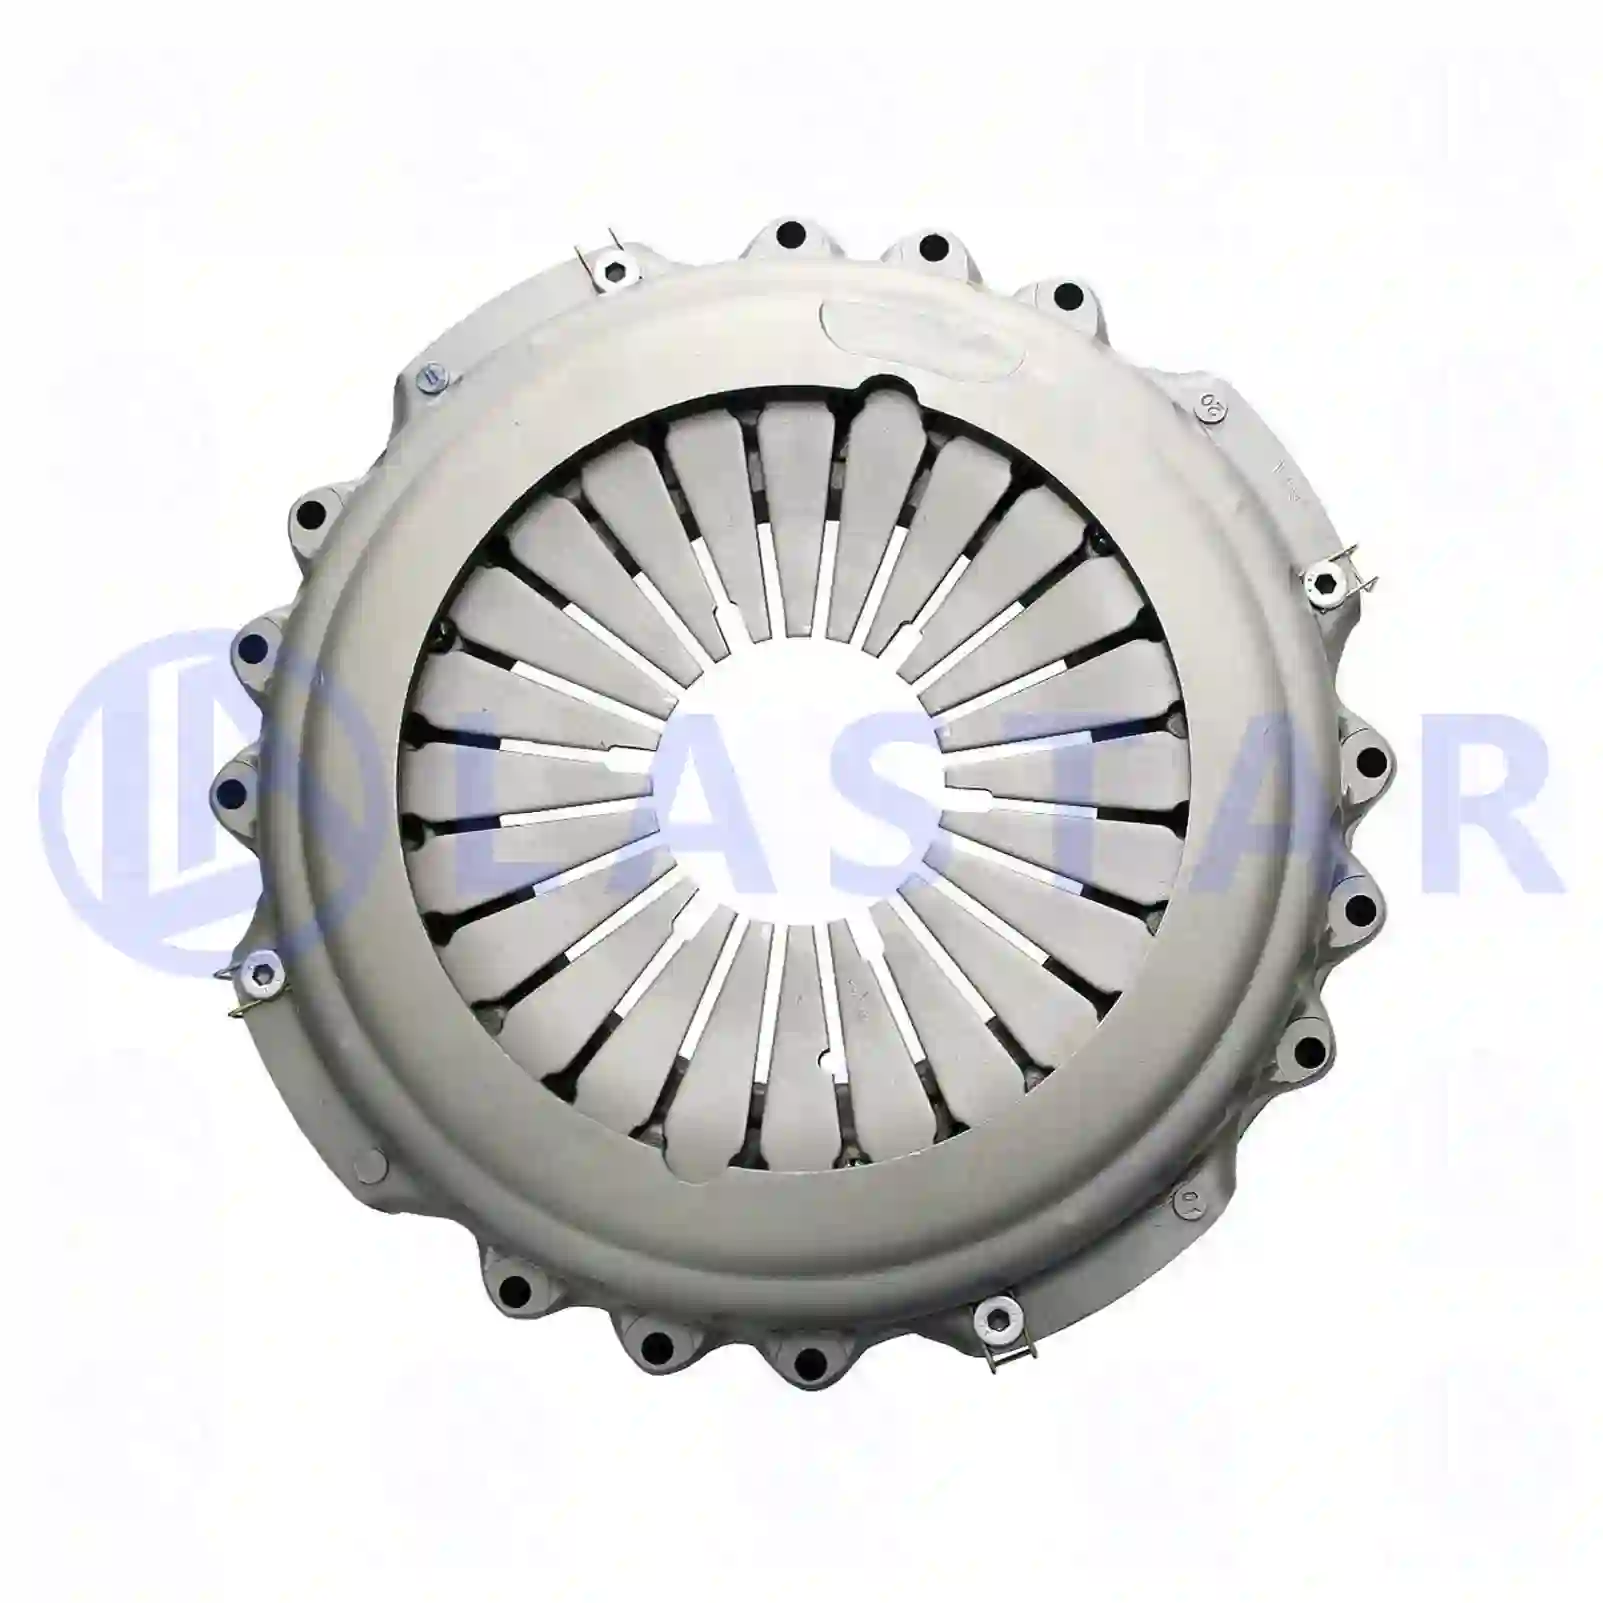 Clutch cover, 77722101, 1113870, 1321254, 1321259, 1361679, 1365486, 1370794, 382499, 382576, 571217, 571218, 571220, 571221, 571226, 571227, 10571217, 10571218, 10571220, 10571221, 10571227, 1113870, 1321254, 1321259, 1361679, 1365486, 1370793, 1370794, 1571217, 1571220, 1571227, 382499, 382576, 571217, 571218, 571220, 571221, 571226, 571227 ||  77722101 Lastar Spare Part | Truck Spare Parts, Auotomotive Spare Parts Clutch cover, 77722101, 1113870, 1321254, 1321259, 1361679, 1365486, 1370794, 382499, 382576, 571217, 571218, 571220, 571221, 571226, 571227, 10571217, 10571218, 10571220, 10571221, 10571227, 1113870, 1321254, 1321259, 1361679, 1365486, 1370793, 1370794, 1571217, 1571220, 1571227, 382499, 382576, 571217, 571218, 571220, 571221, 571226, 571227 ||  77722101 Lastar Spare Part | Truck Spare Parts, Auotomotive Spare Parts